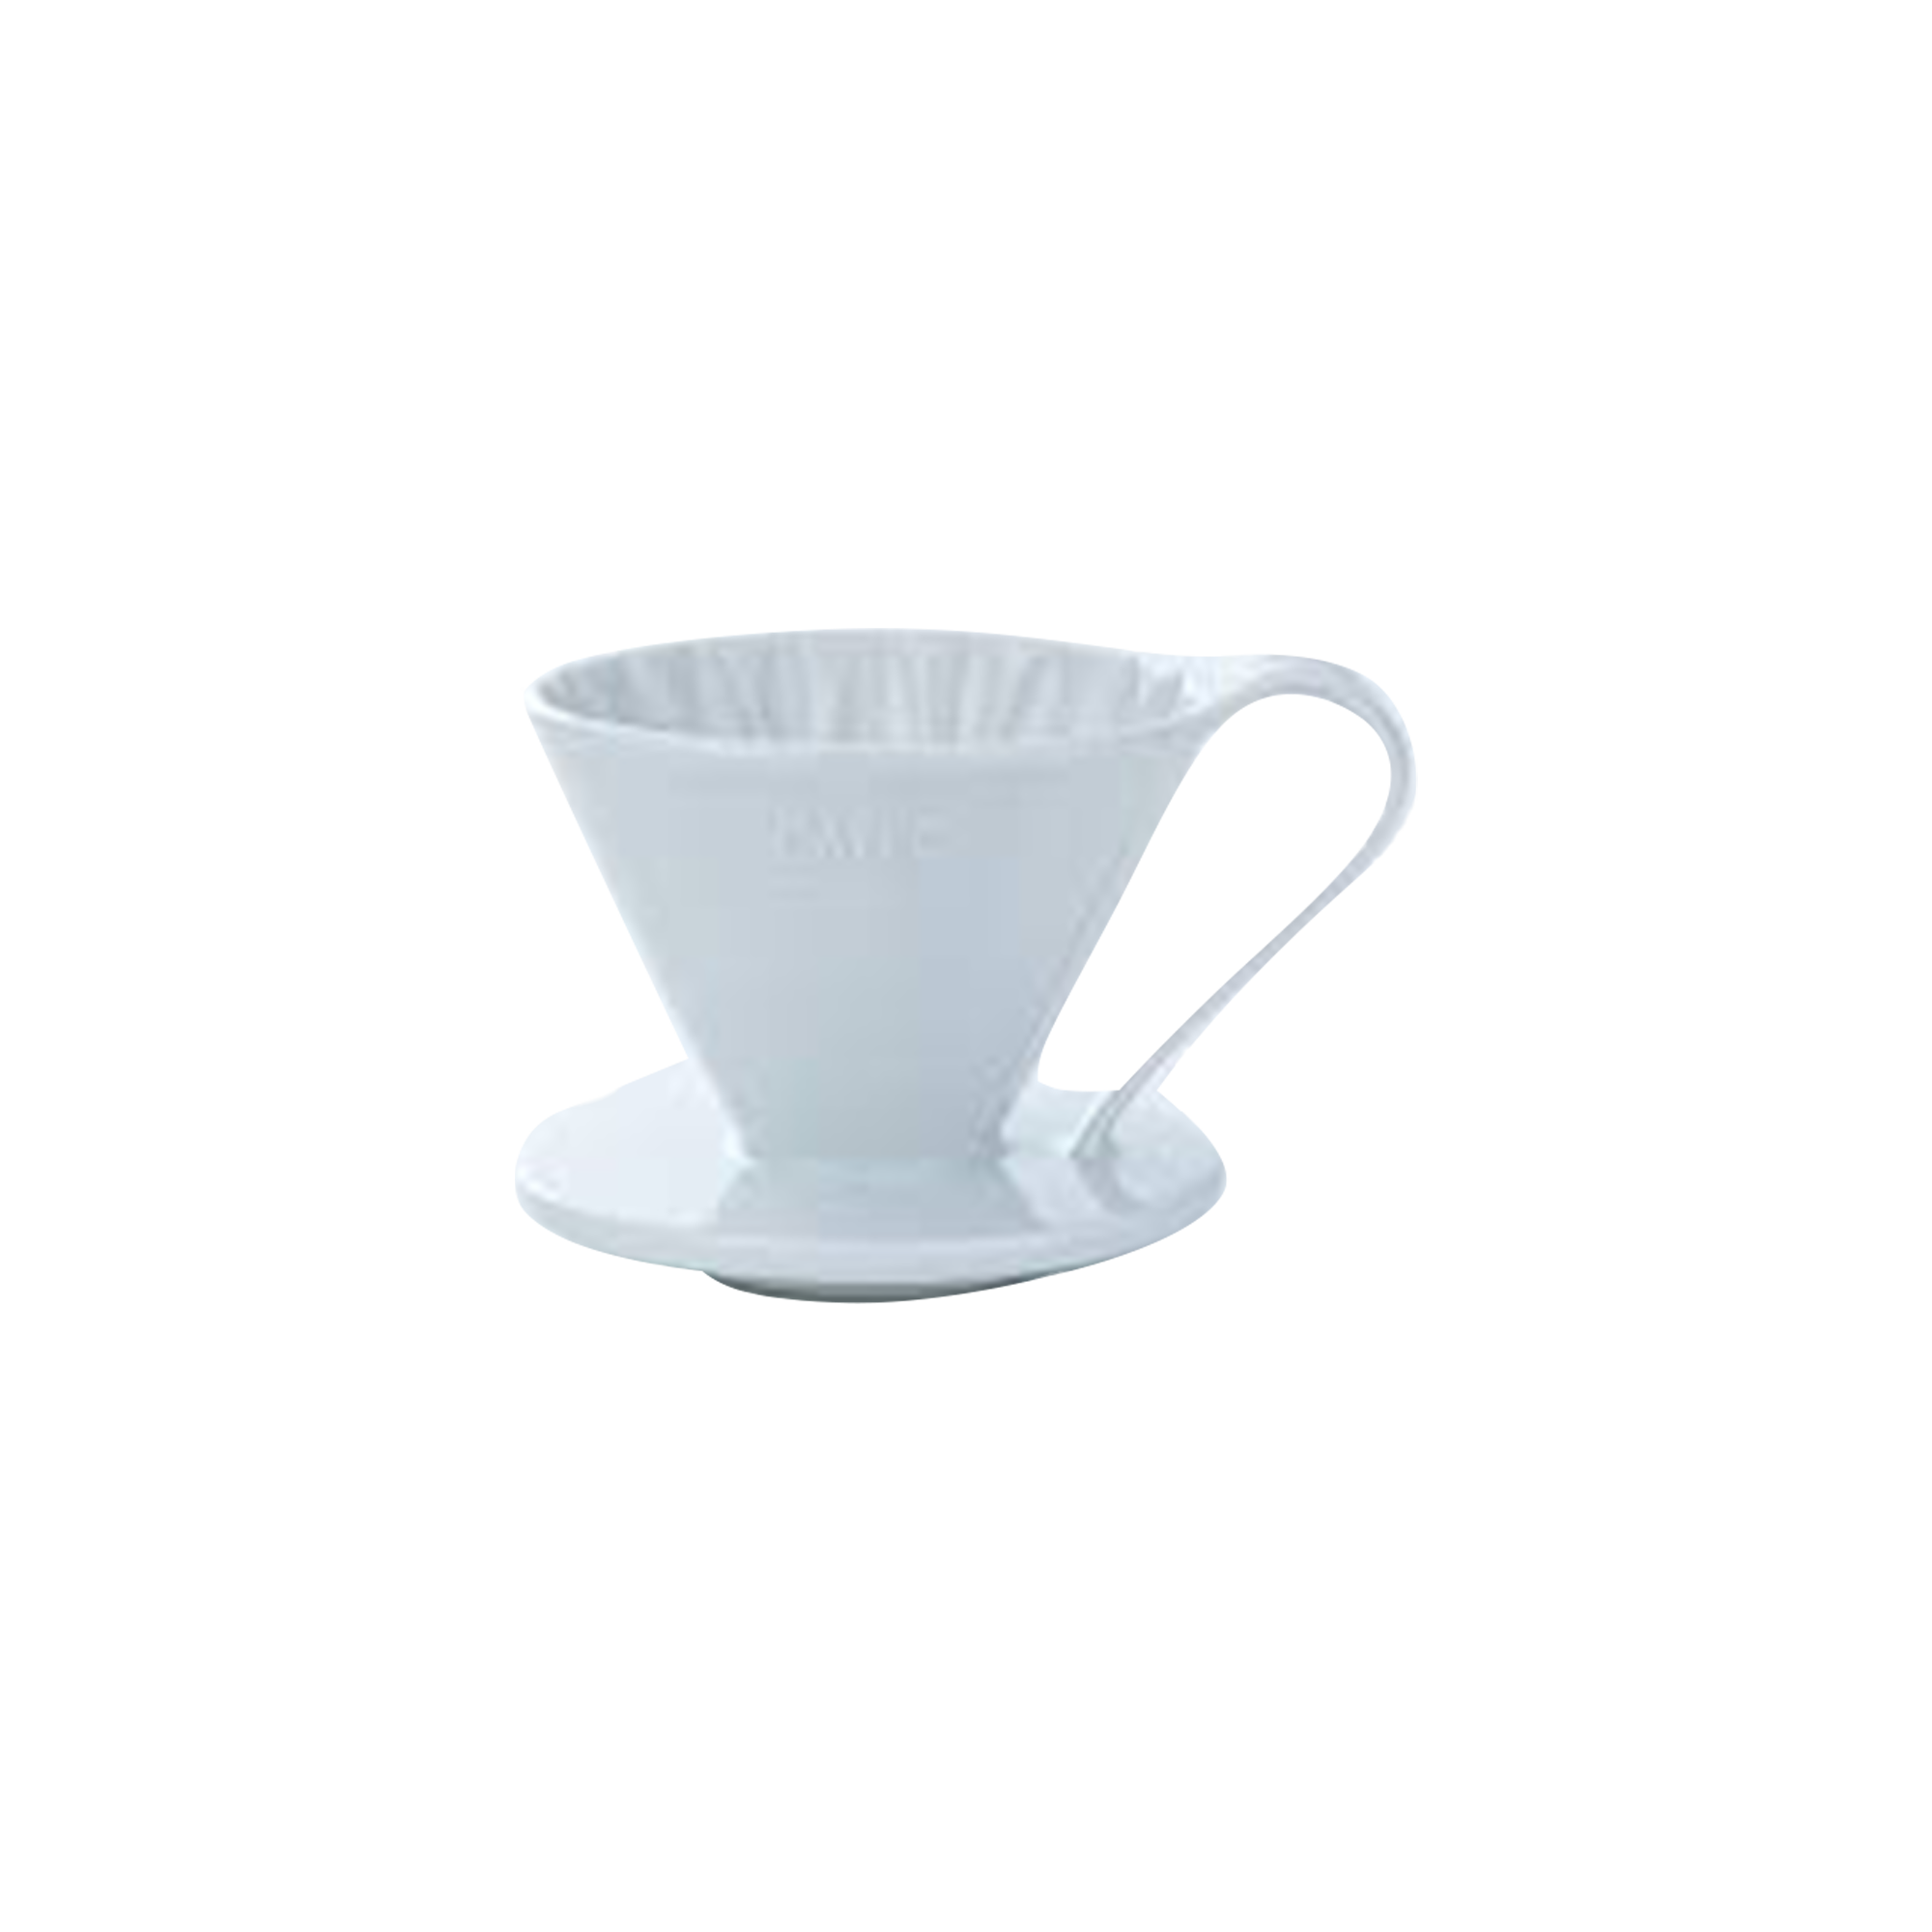 Flower Dripper 1 Cup - Color